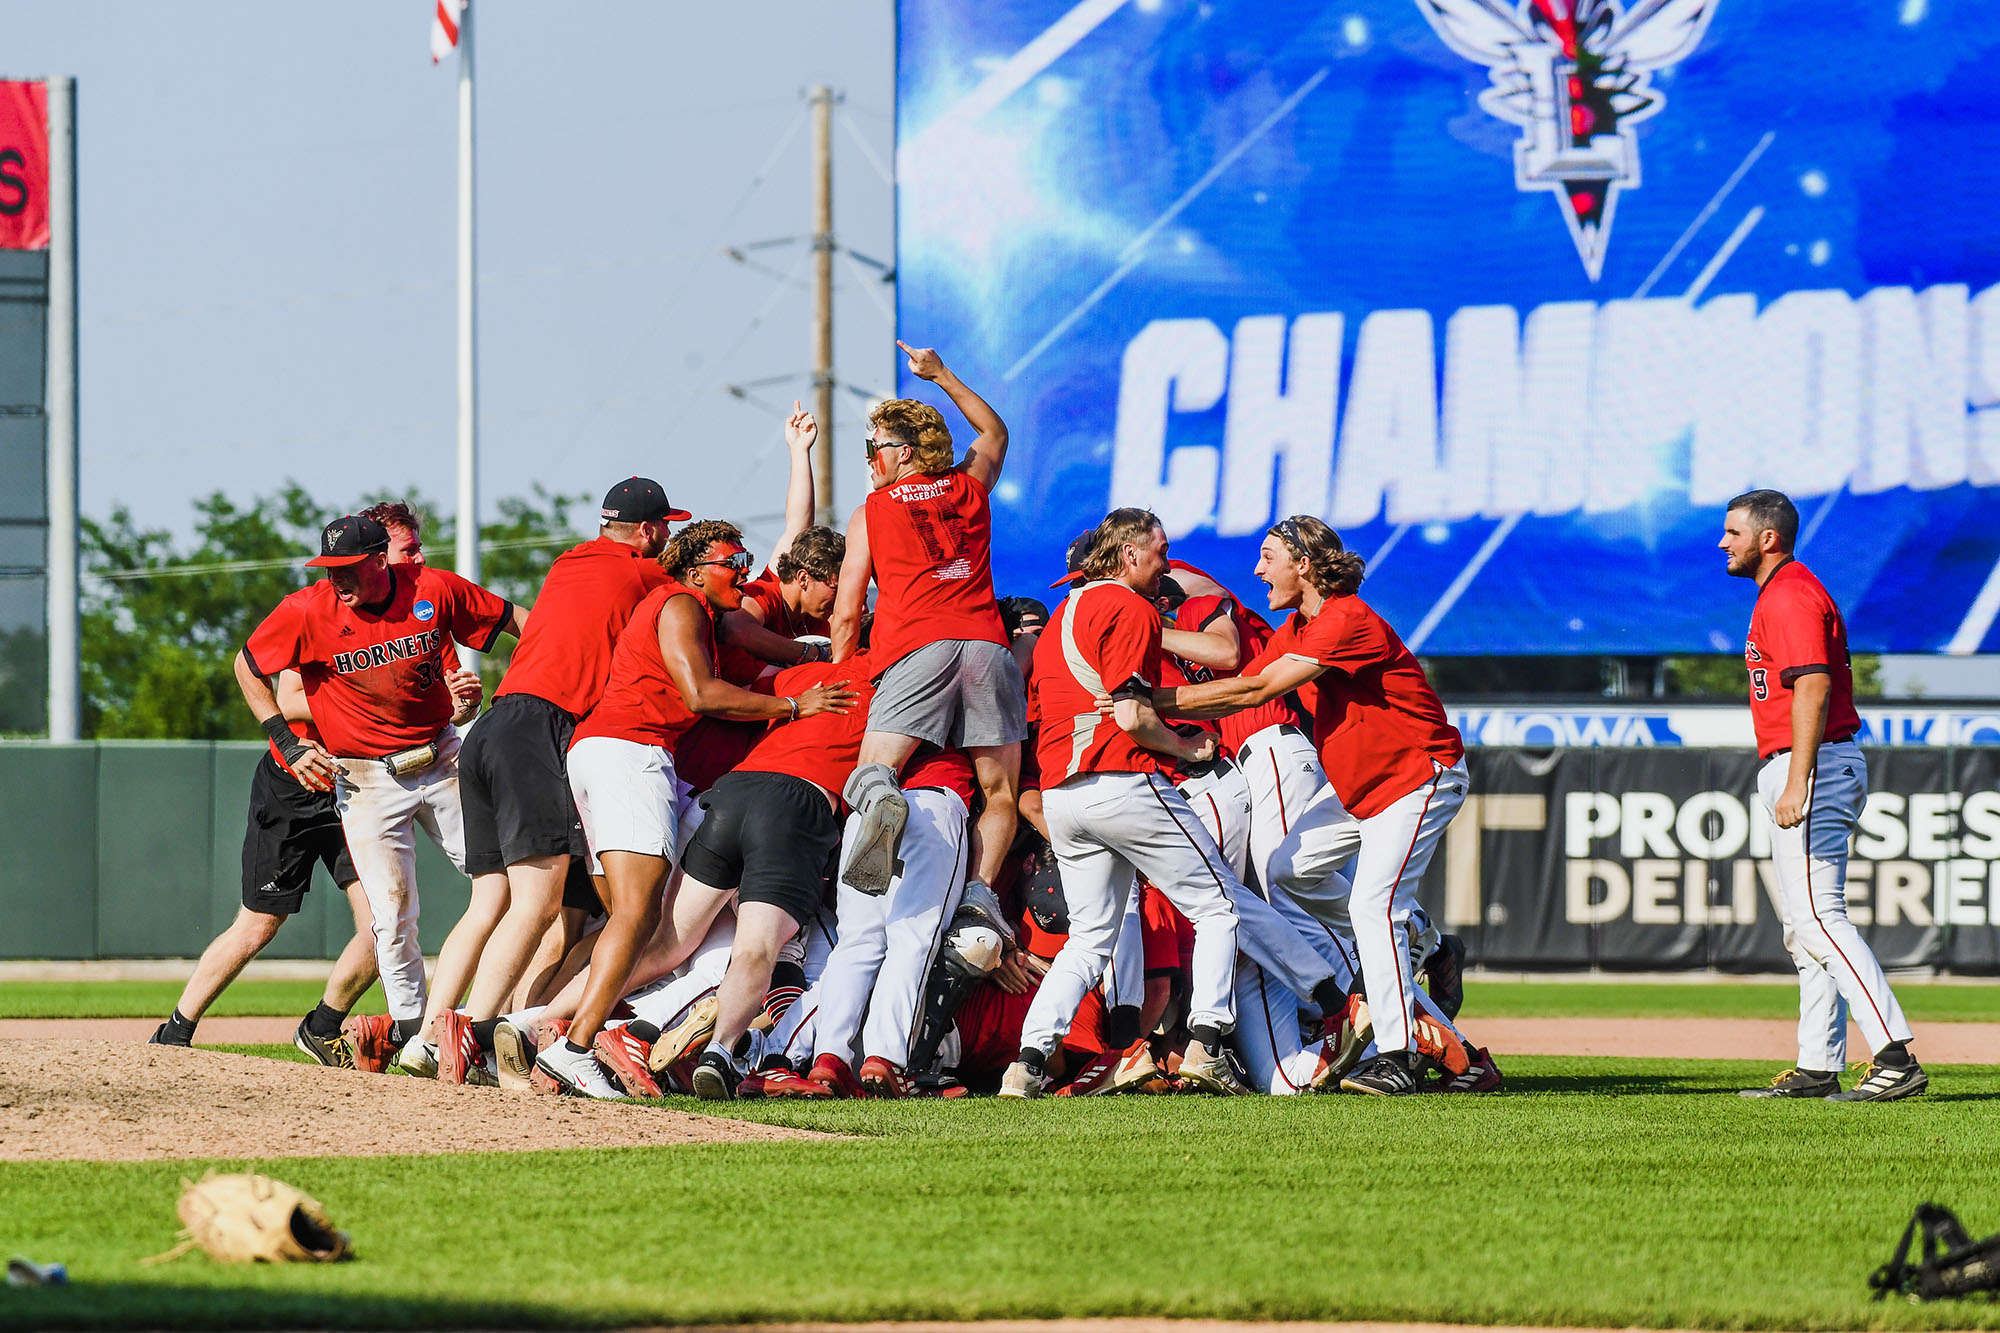 Lynchburg's baseball team huddles together immediately after they win the NCAA Division III national championship in Iowa.